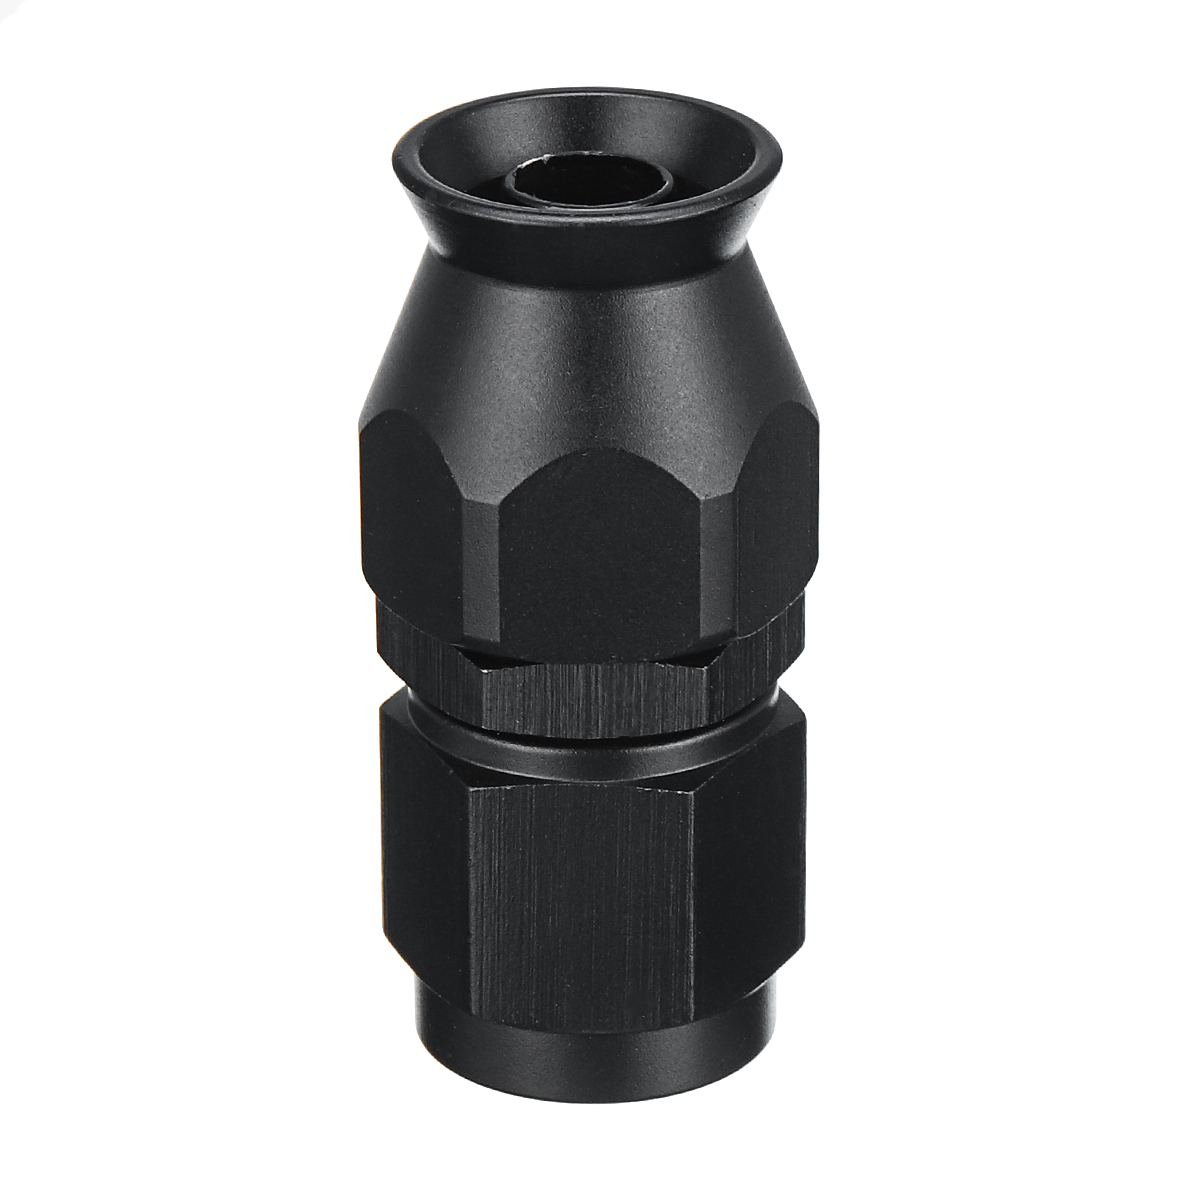 AN-6-Straight-Stealth-Black-Fuel-Hose-Pipes-Fittings-AN6-Connector-1361067-2